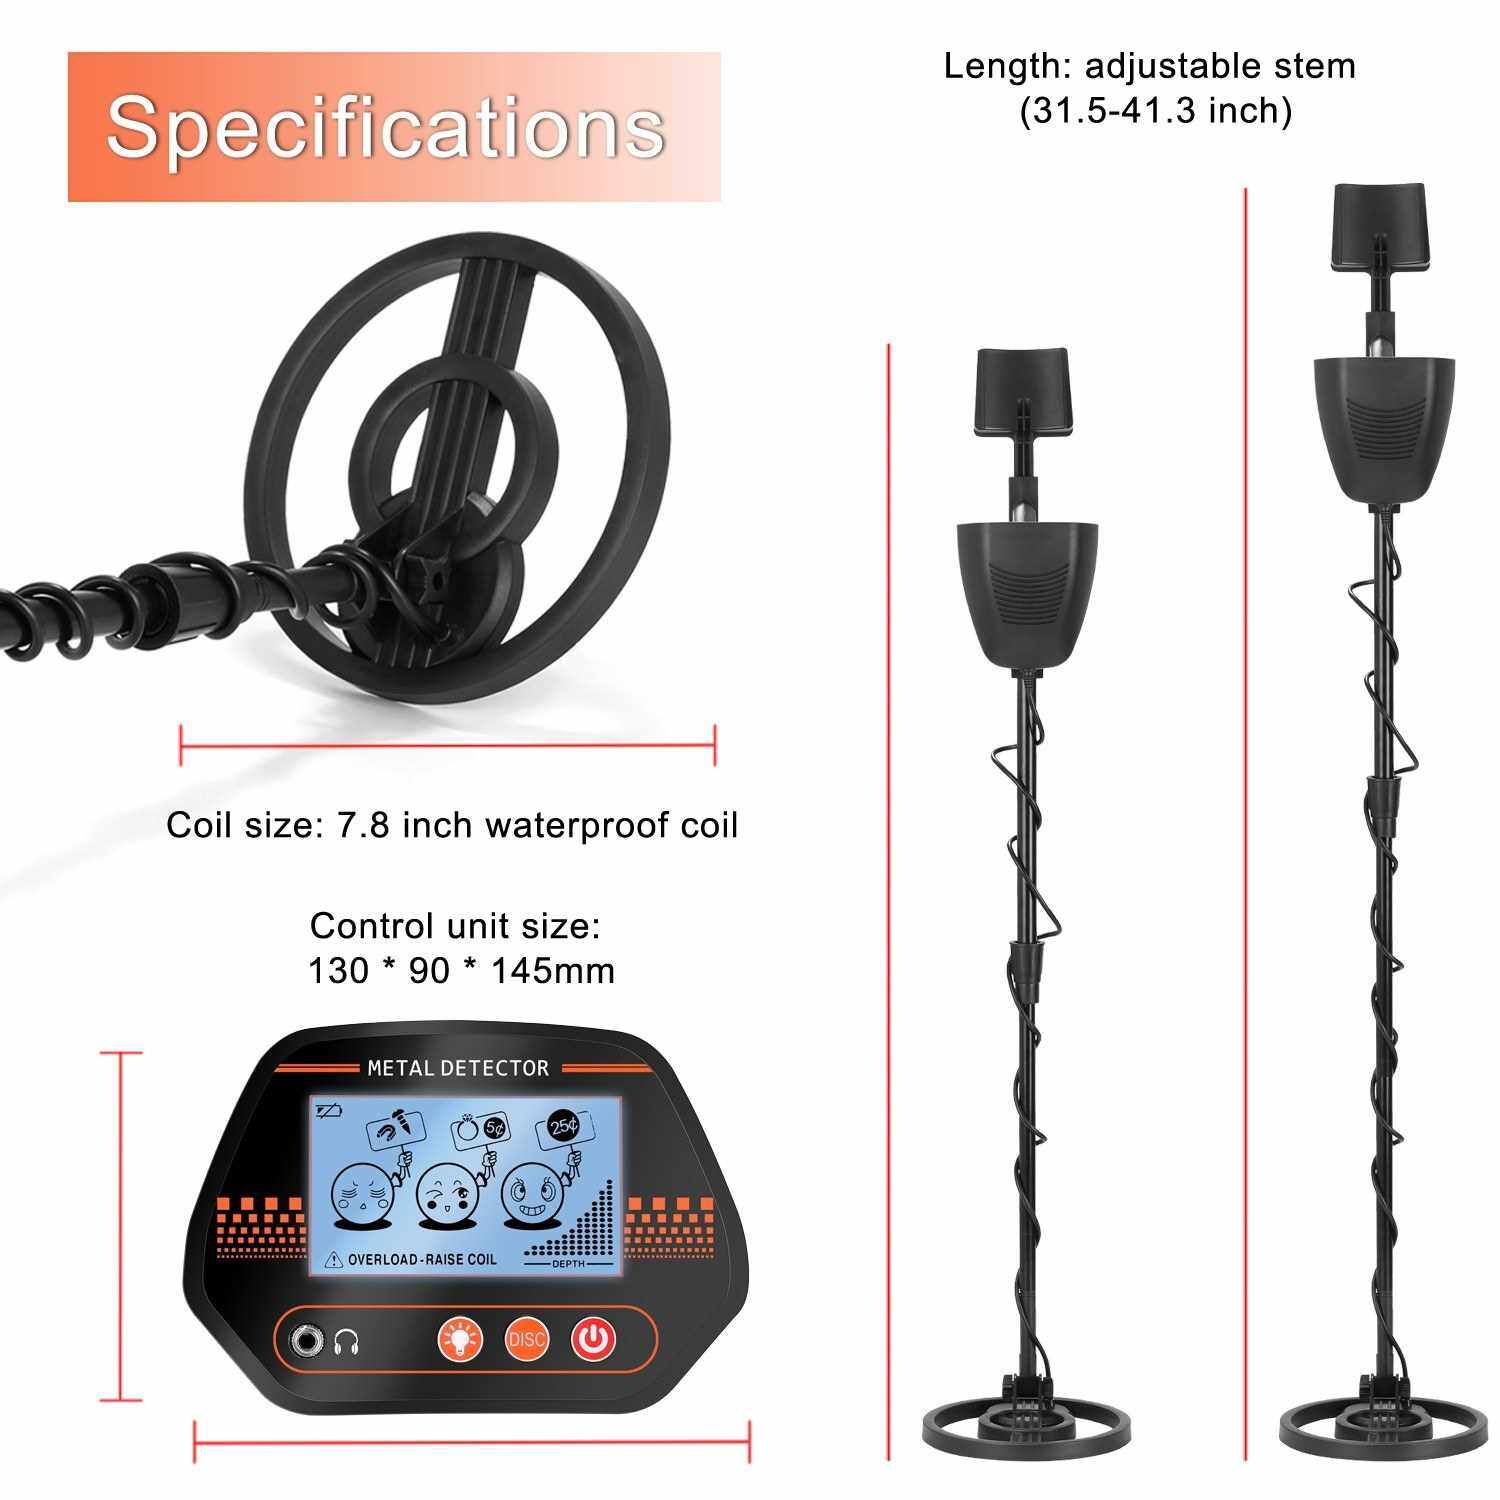 MD830 Portable Easy Installation Underground Metal Detector High Sensitivity Jewelry Treasure Gold Metal Detecting Tool Finder with 3 Adjustable Modes Larger Back-lit LCD Display 3 Audio Tone and DISC Mode for Adults and Kids (3)